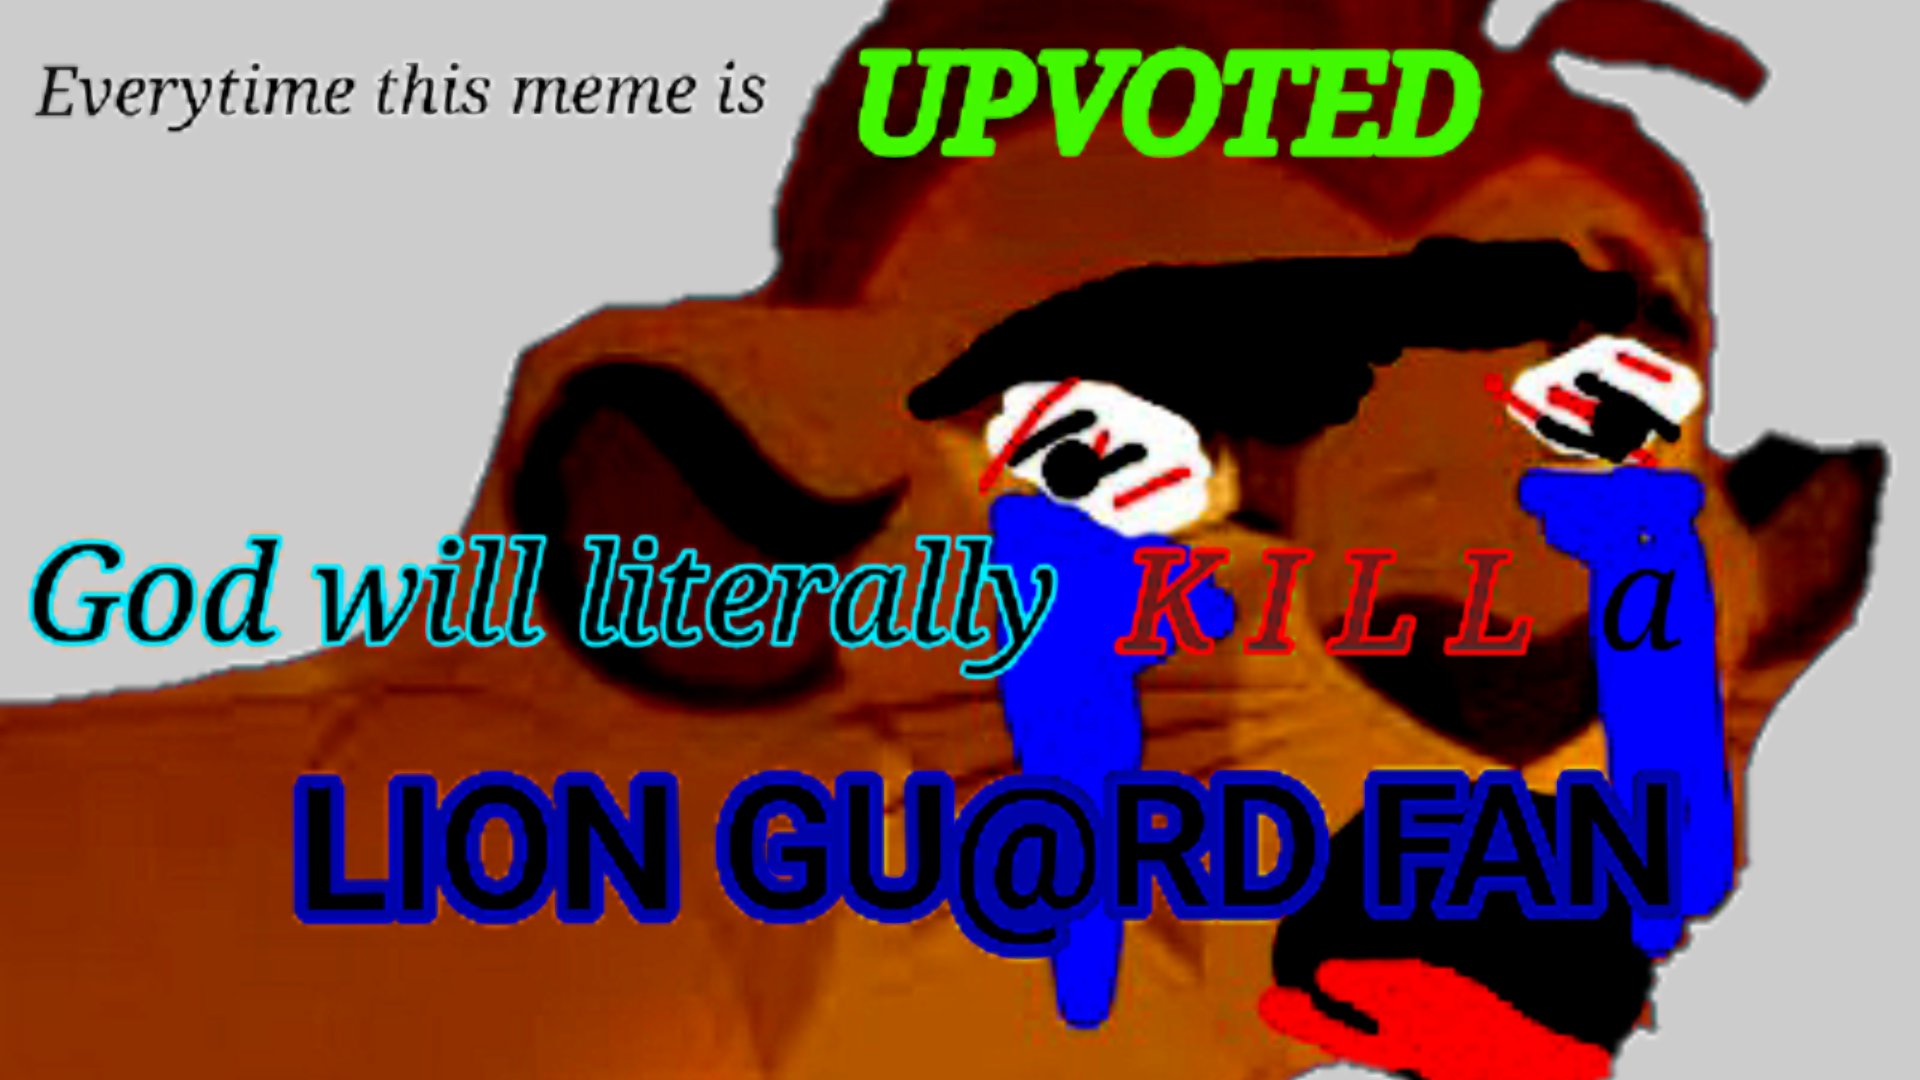 Everytime this meme is upvoted god will kill a lion gu@rd fan Blank Meme Template